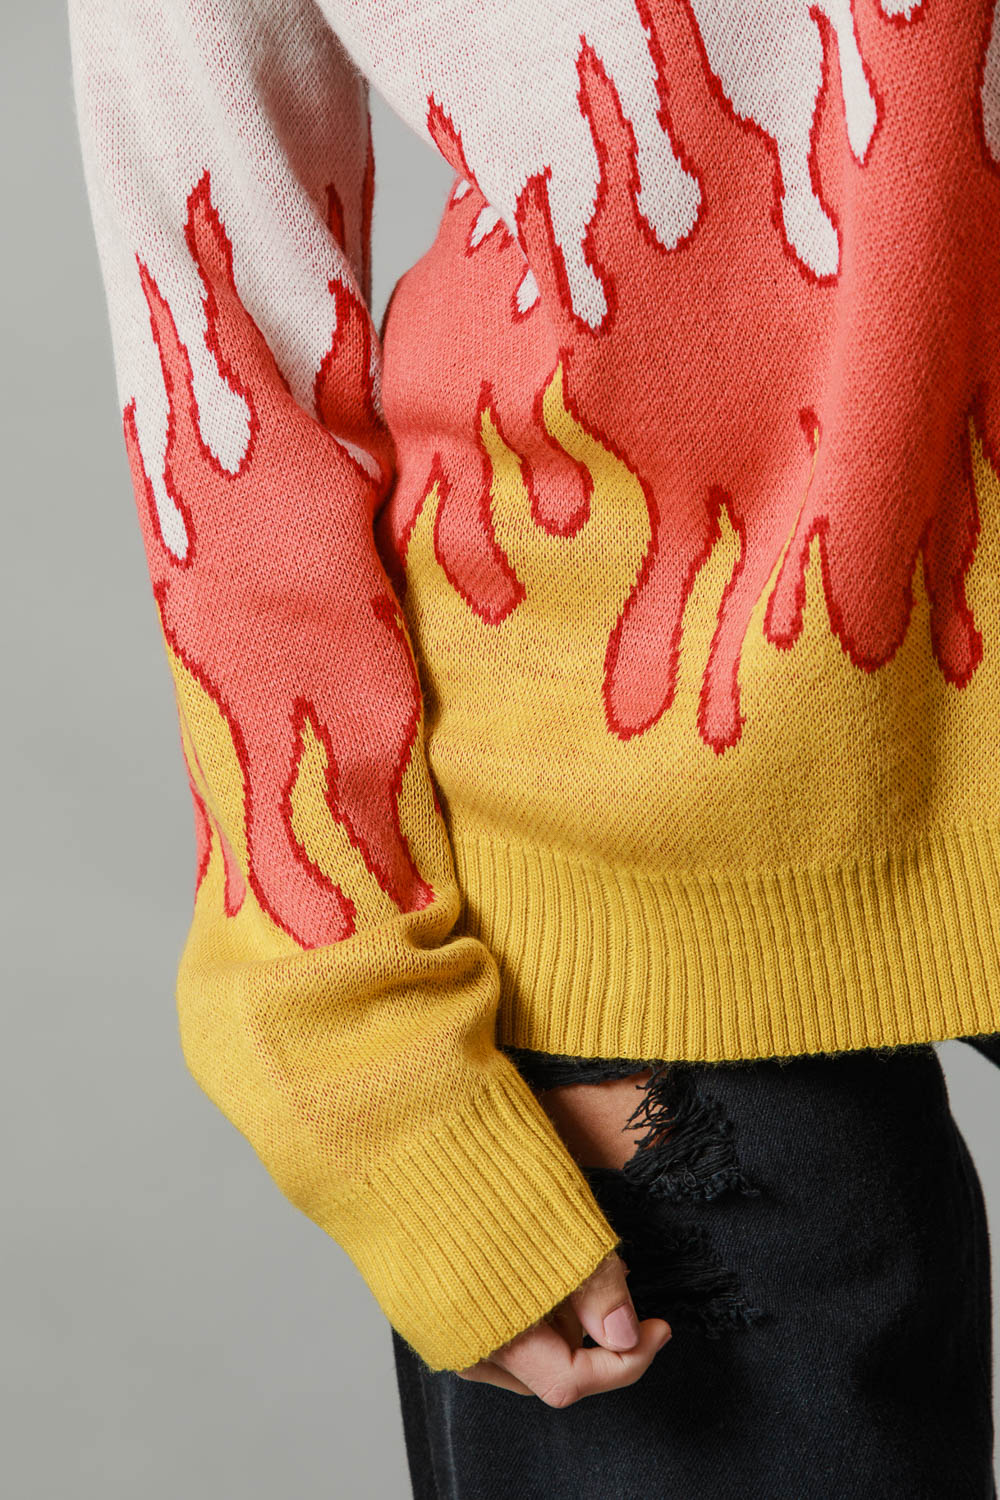 johnlcook_sweater-new-flames_11-30-2022__picture-8543